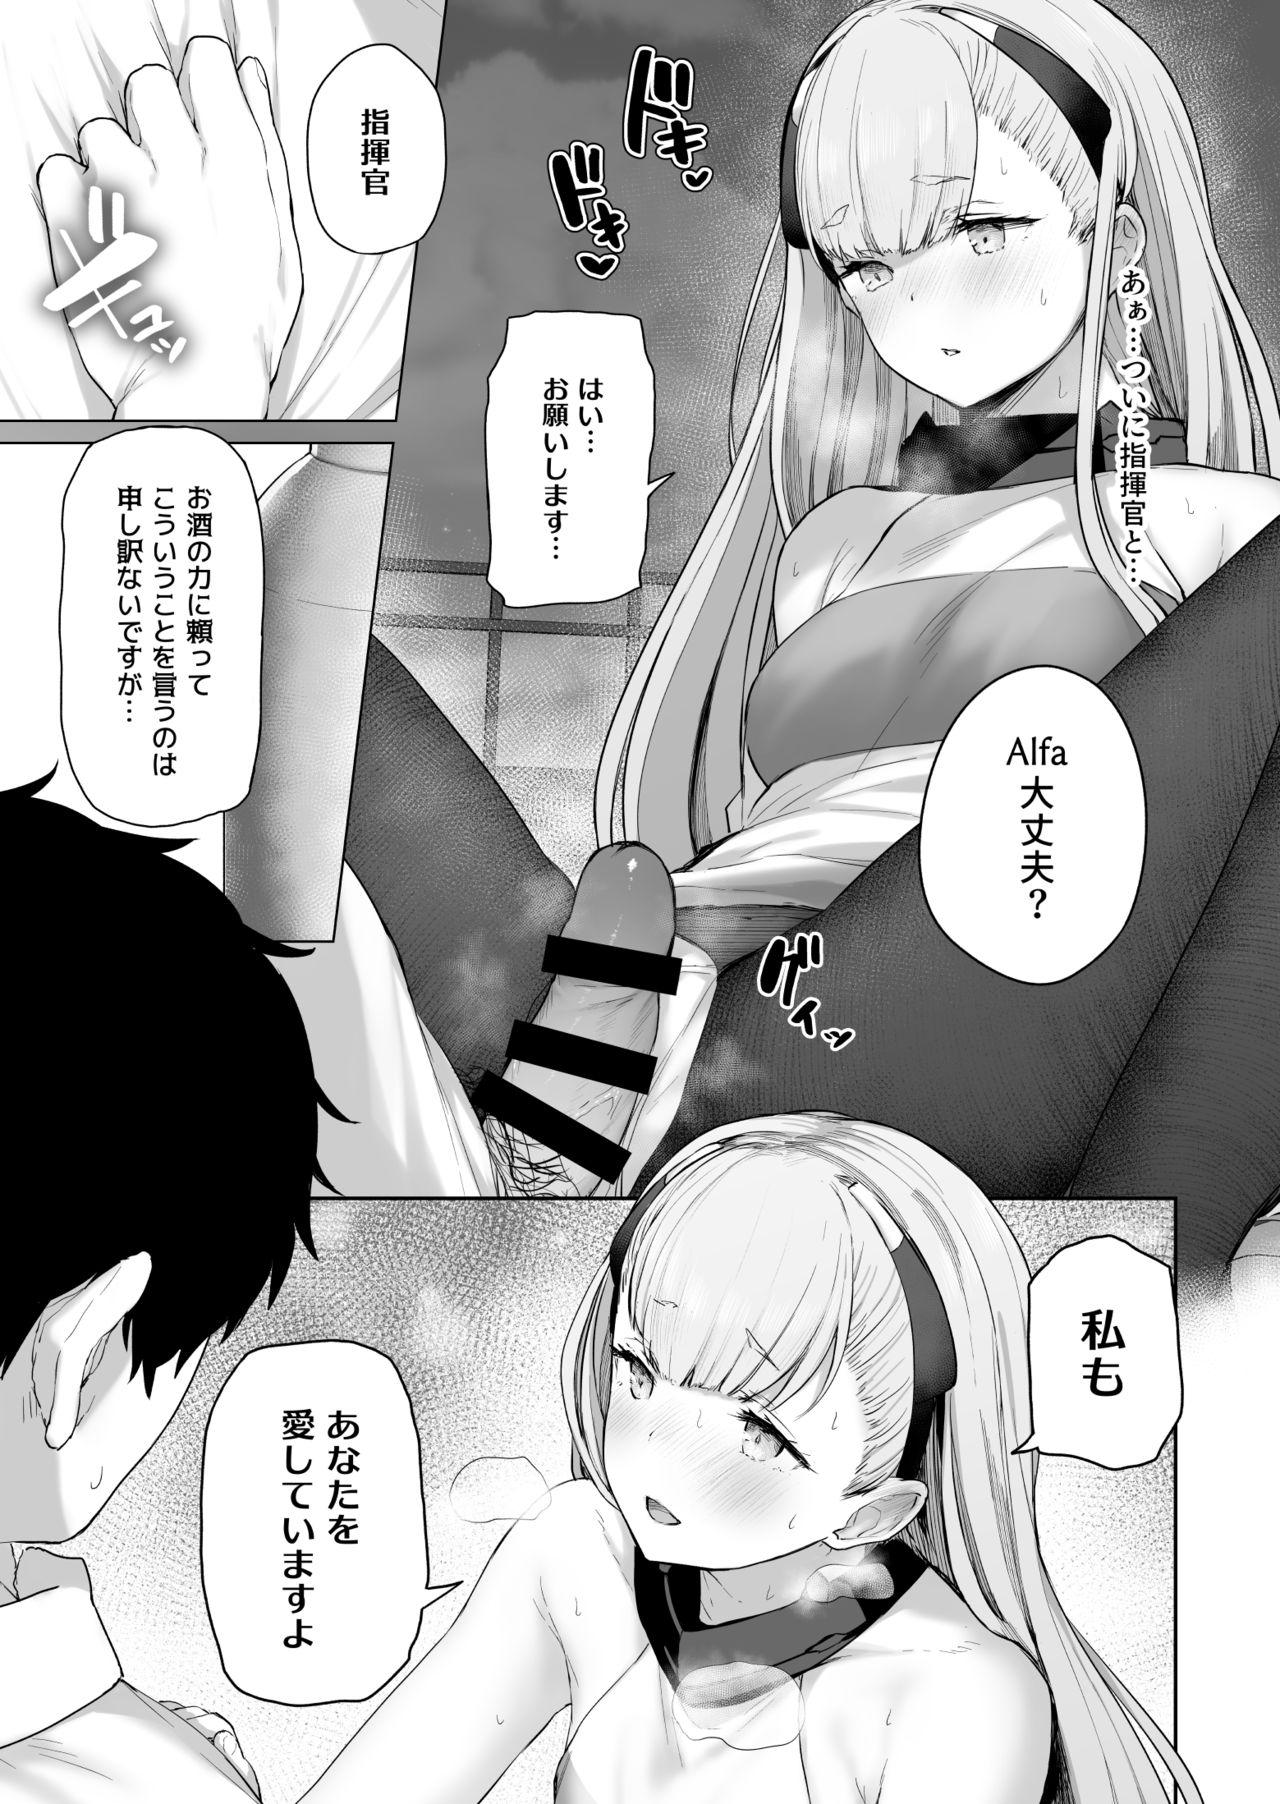 Cutie AK-Alfa - Girls frontline Pussy Play - Page 10